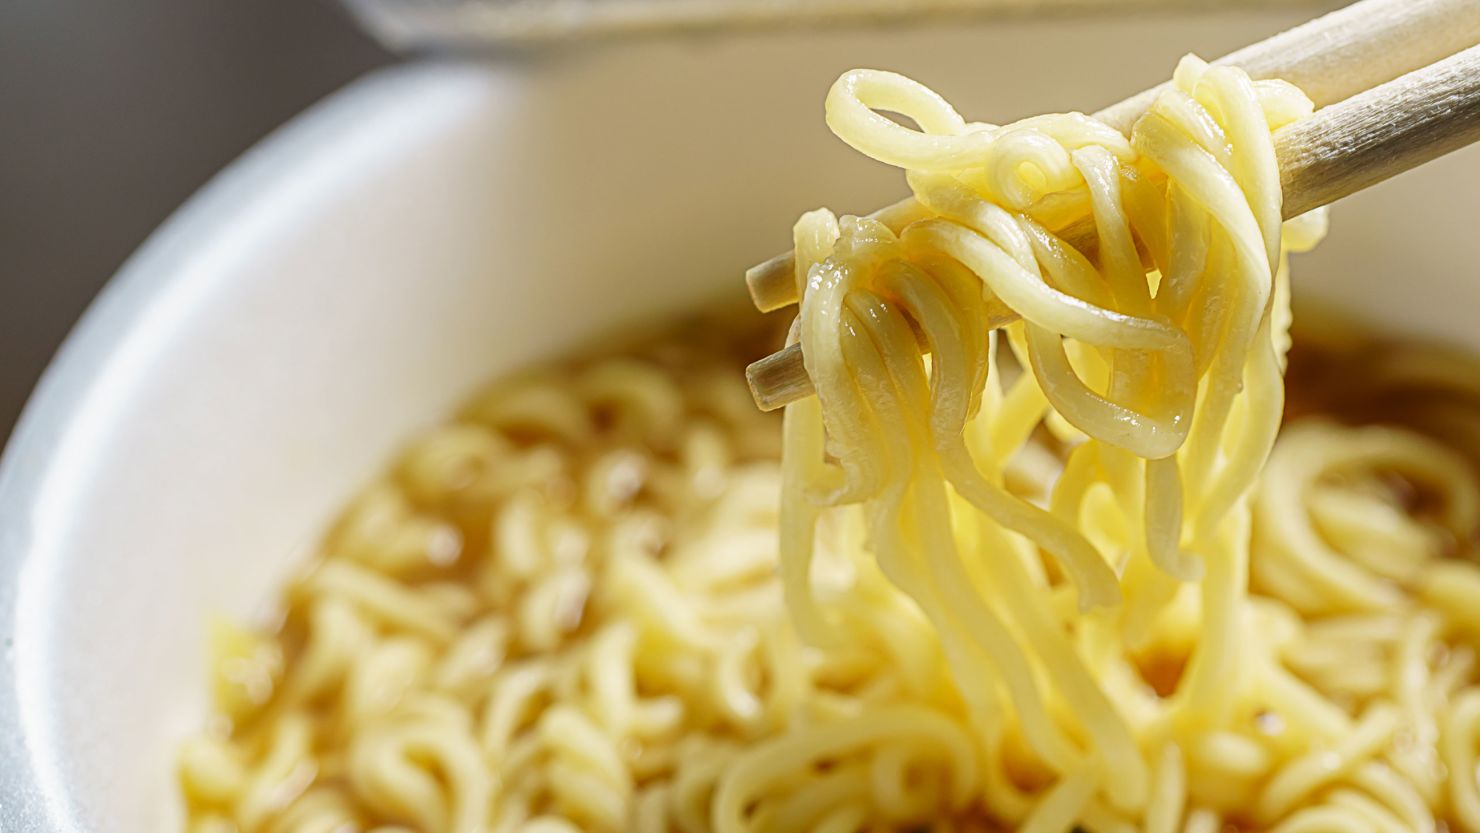 A new study has found almost a third of pediatric burn patients admitted to the University of Chicago's Burn Center over 10 years were burned while preparing instant noodles.